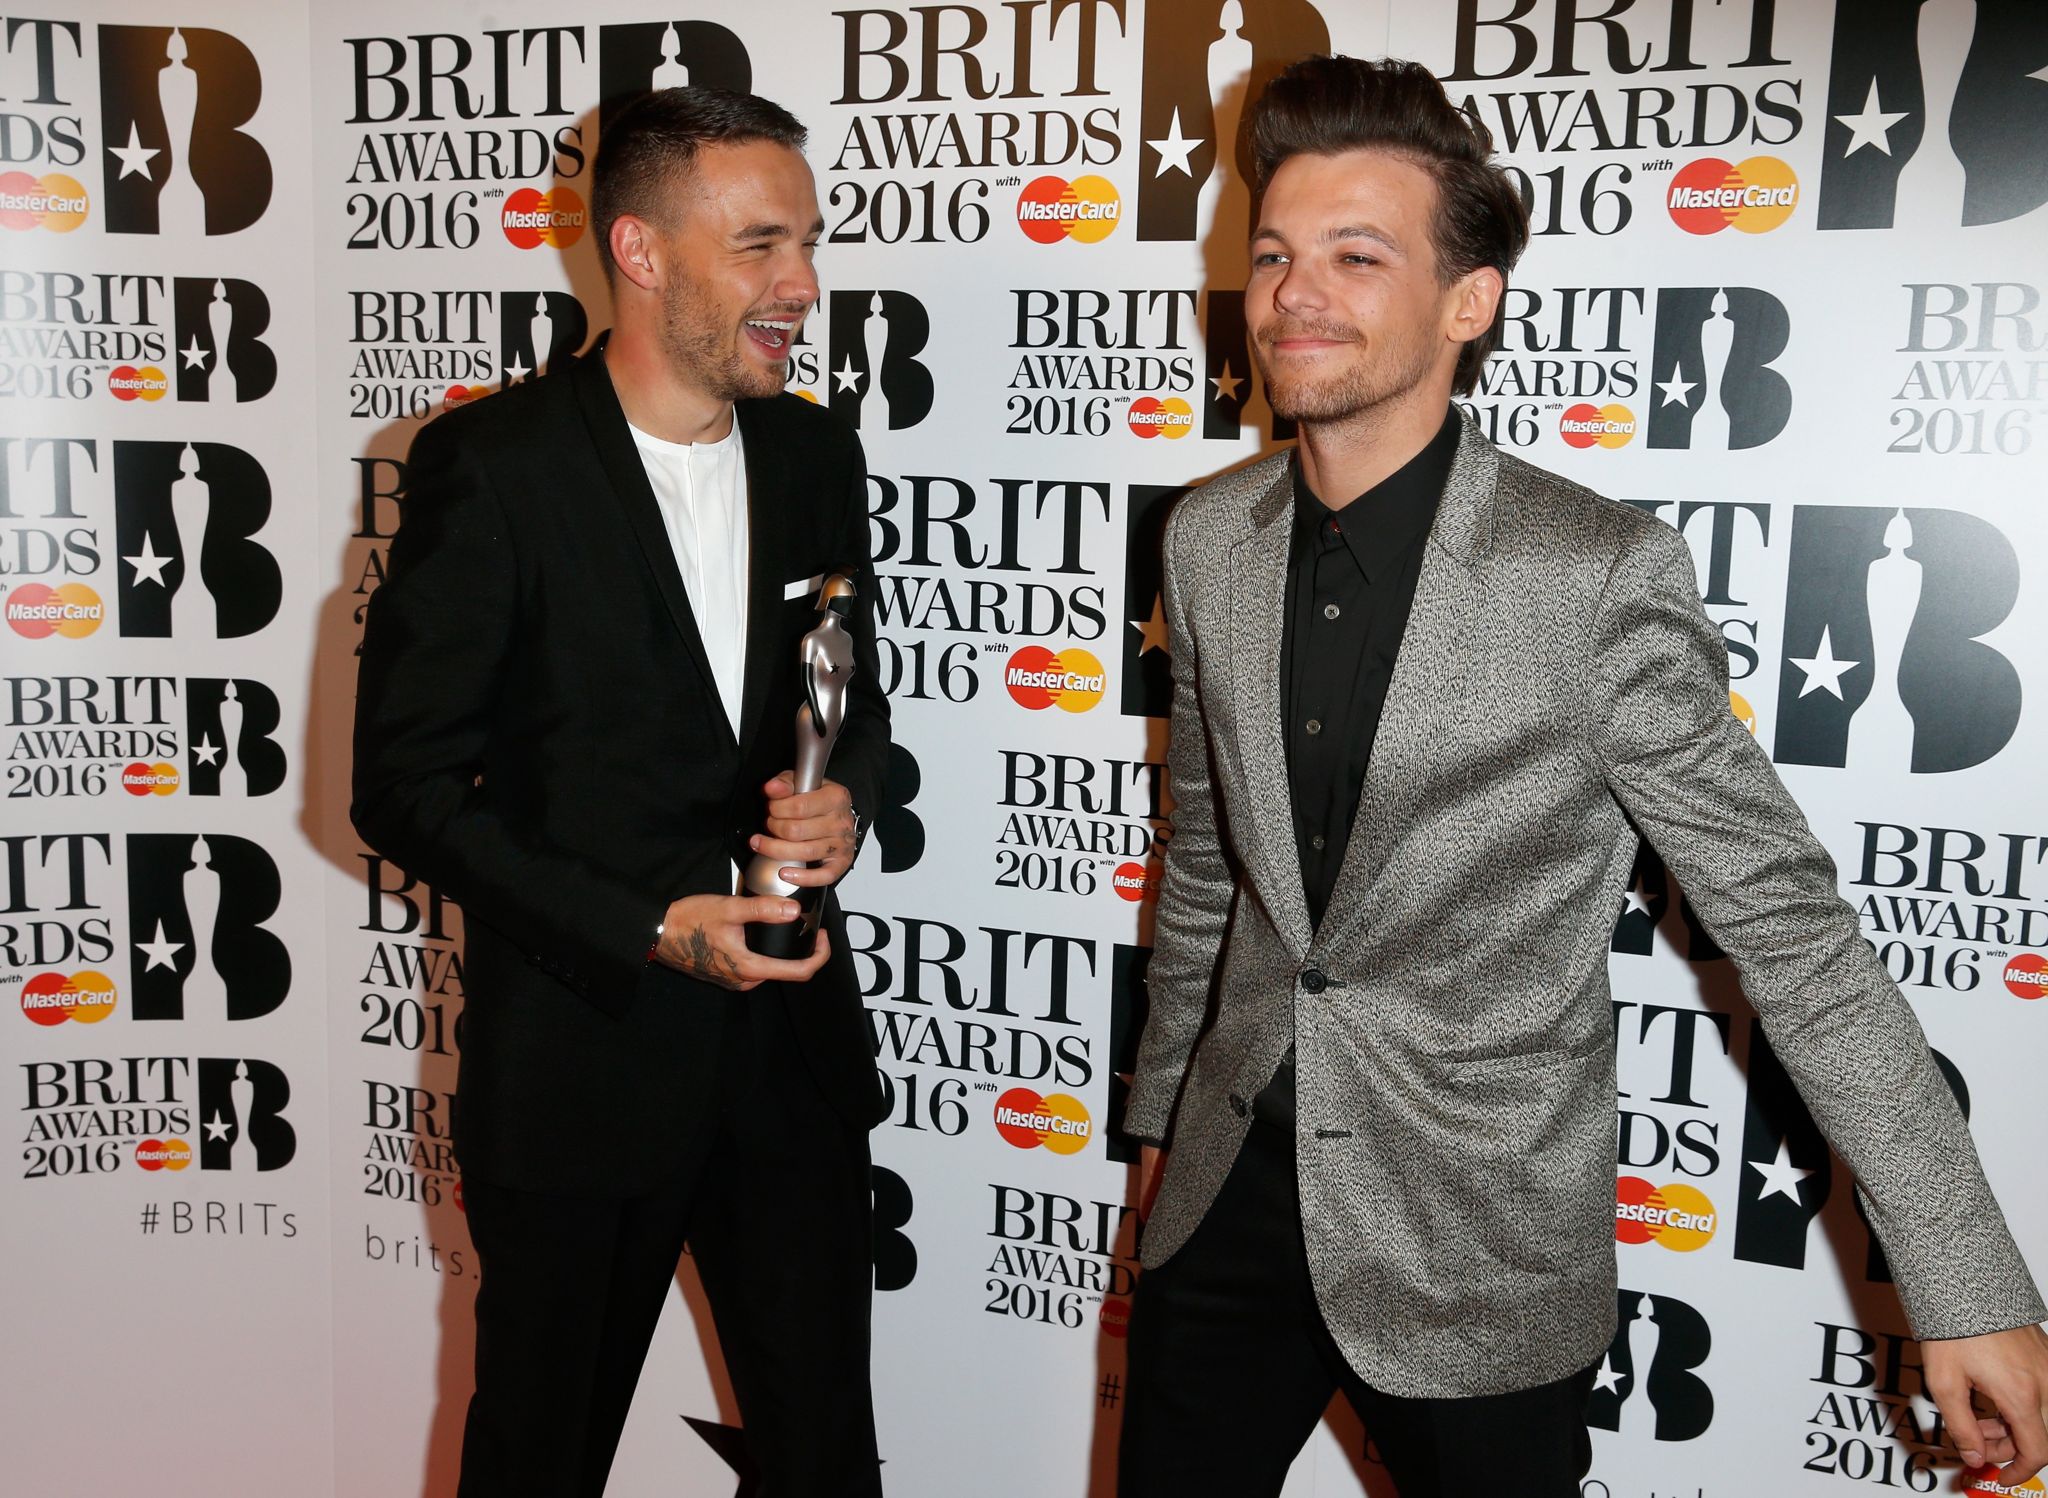 Liam Payne and Louis Tomlinson at the 2016 Brit Awards